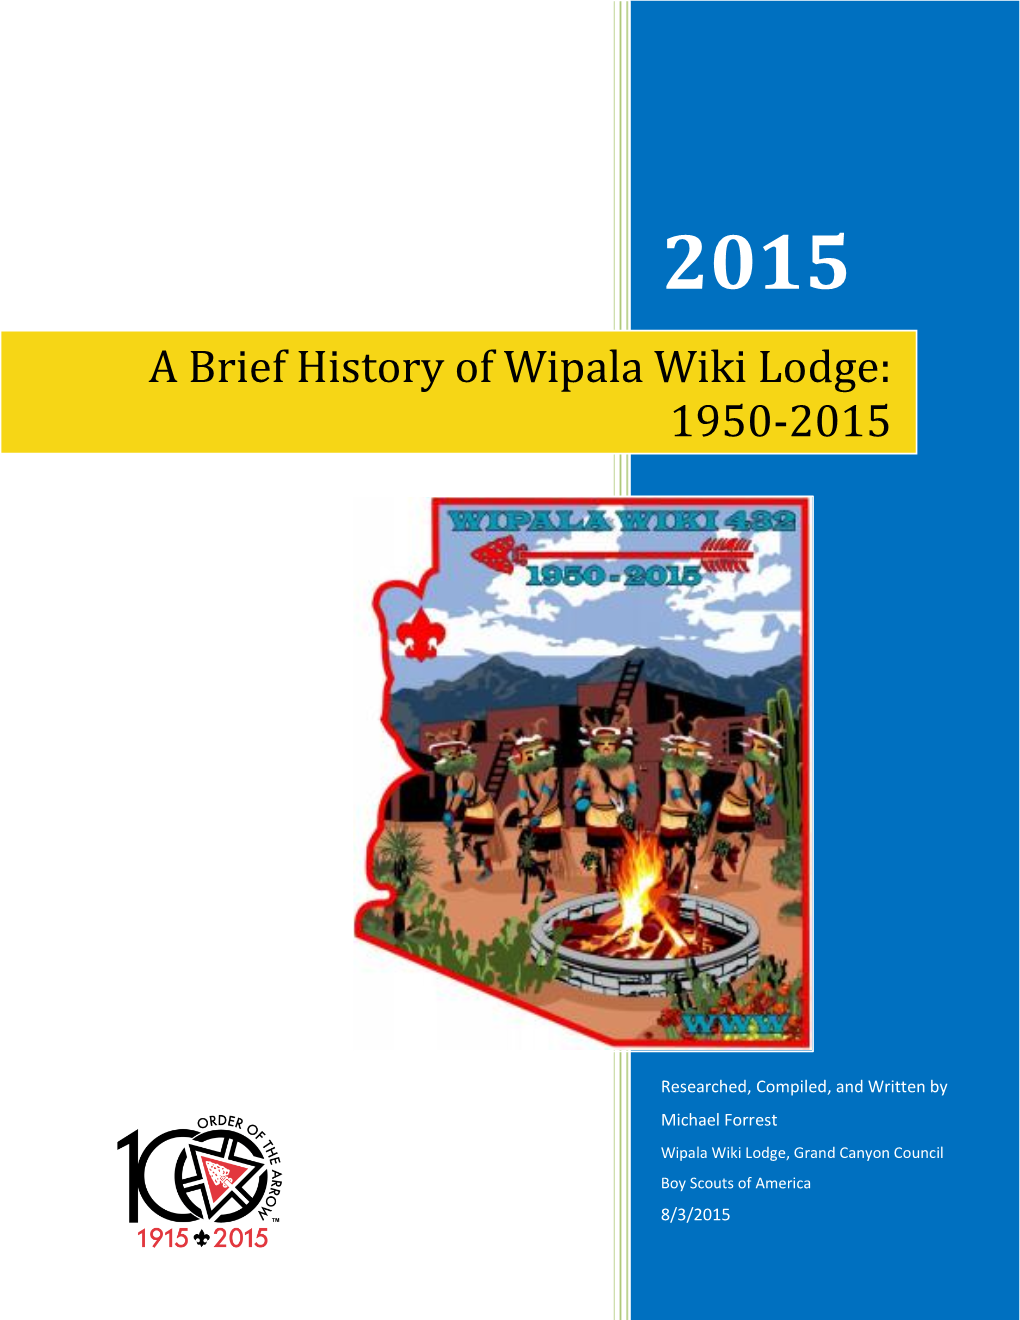 A Brief History of Wipala Wiki Lodge: 1950-2015